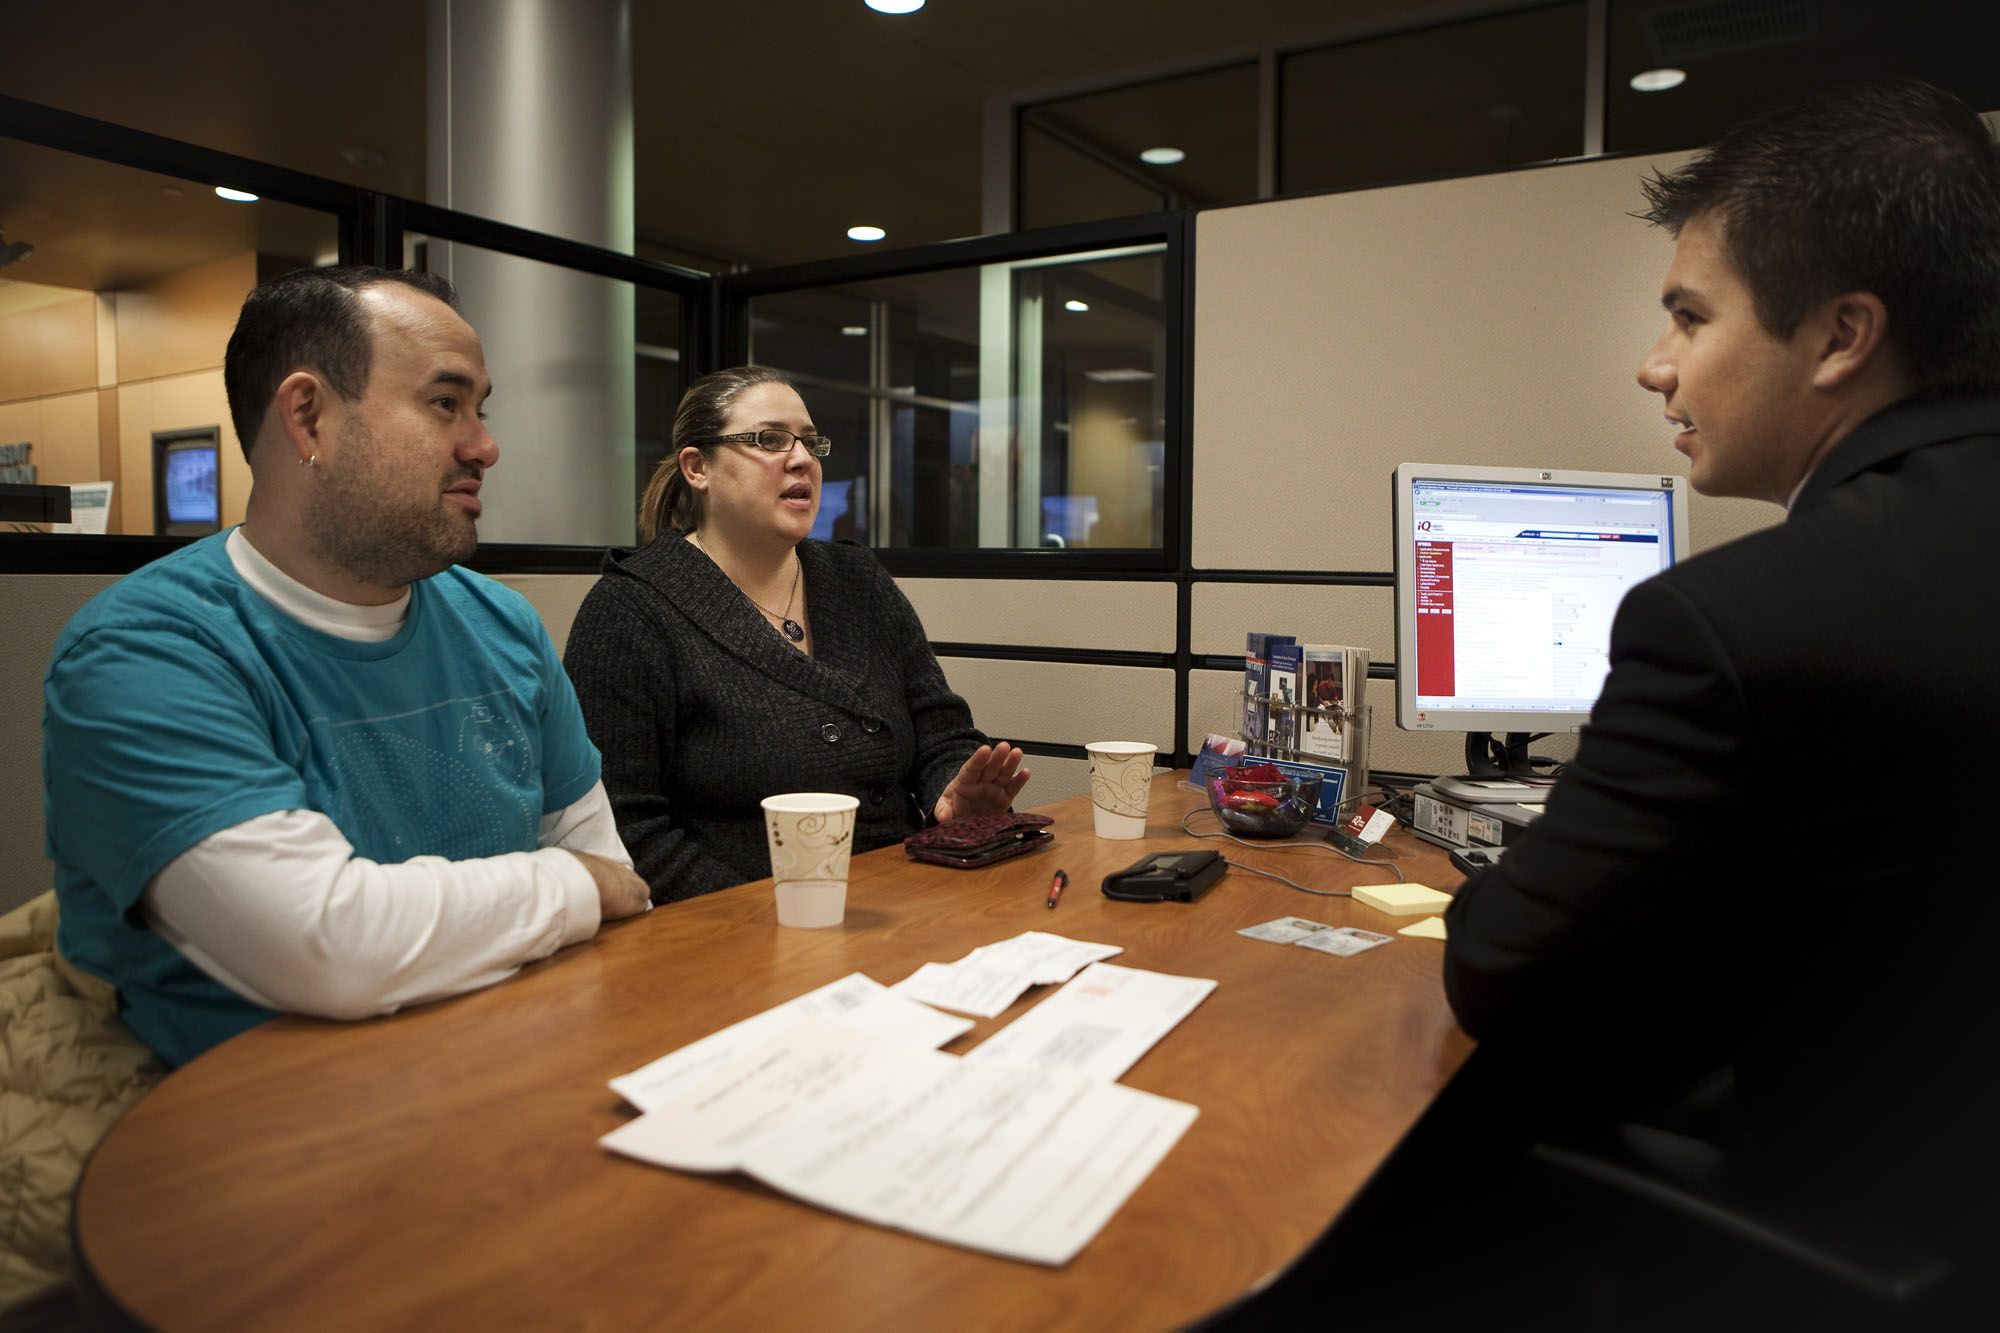 Dan Boggs, member service officer at iQ Credit Union, helps Liz and Jesse Weiss open a checking account. The couple previously banked at Bank of America but were fed up with fees.